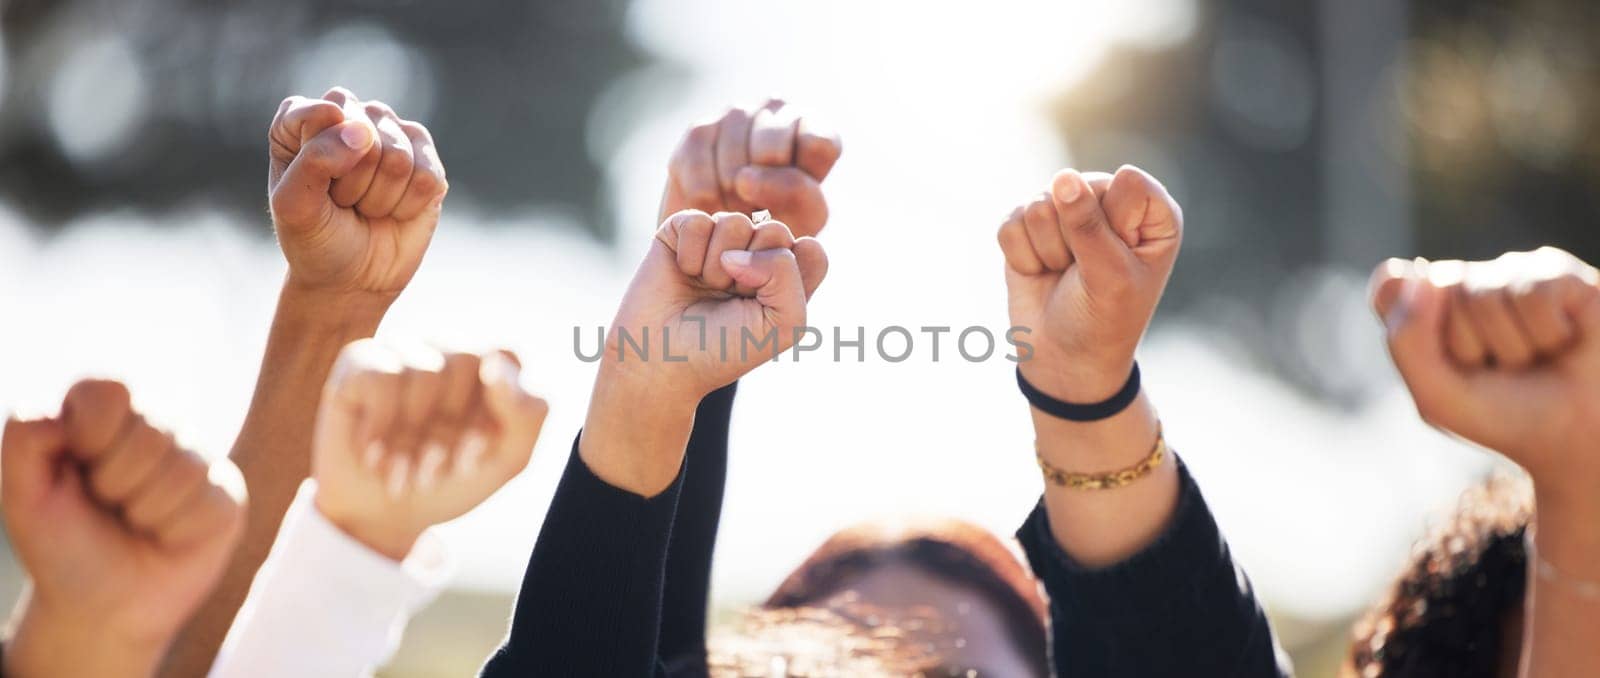 Closeup, group and protest with solidarity, hands and support for human rights, equality or freedom. Zoom, community or protesters with teamwork, activism or union with empowerment, outdoor and crowd by YuriArcurs